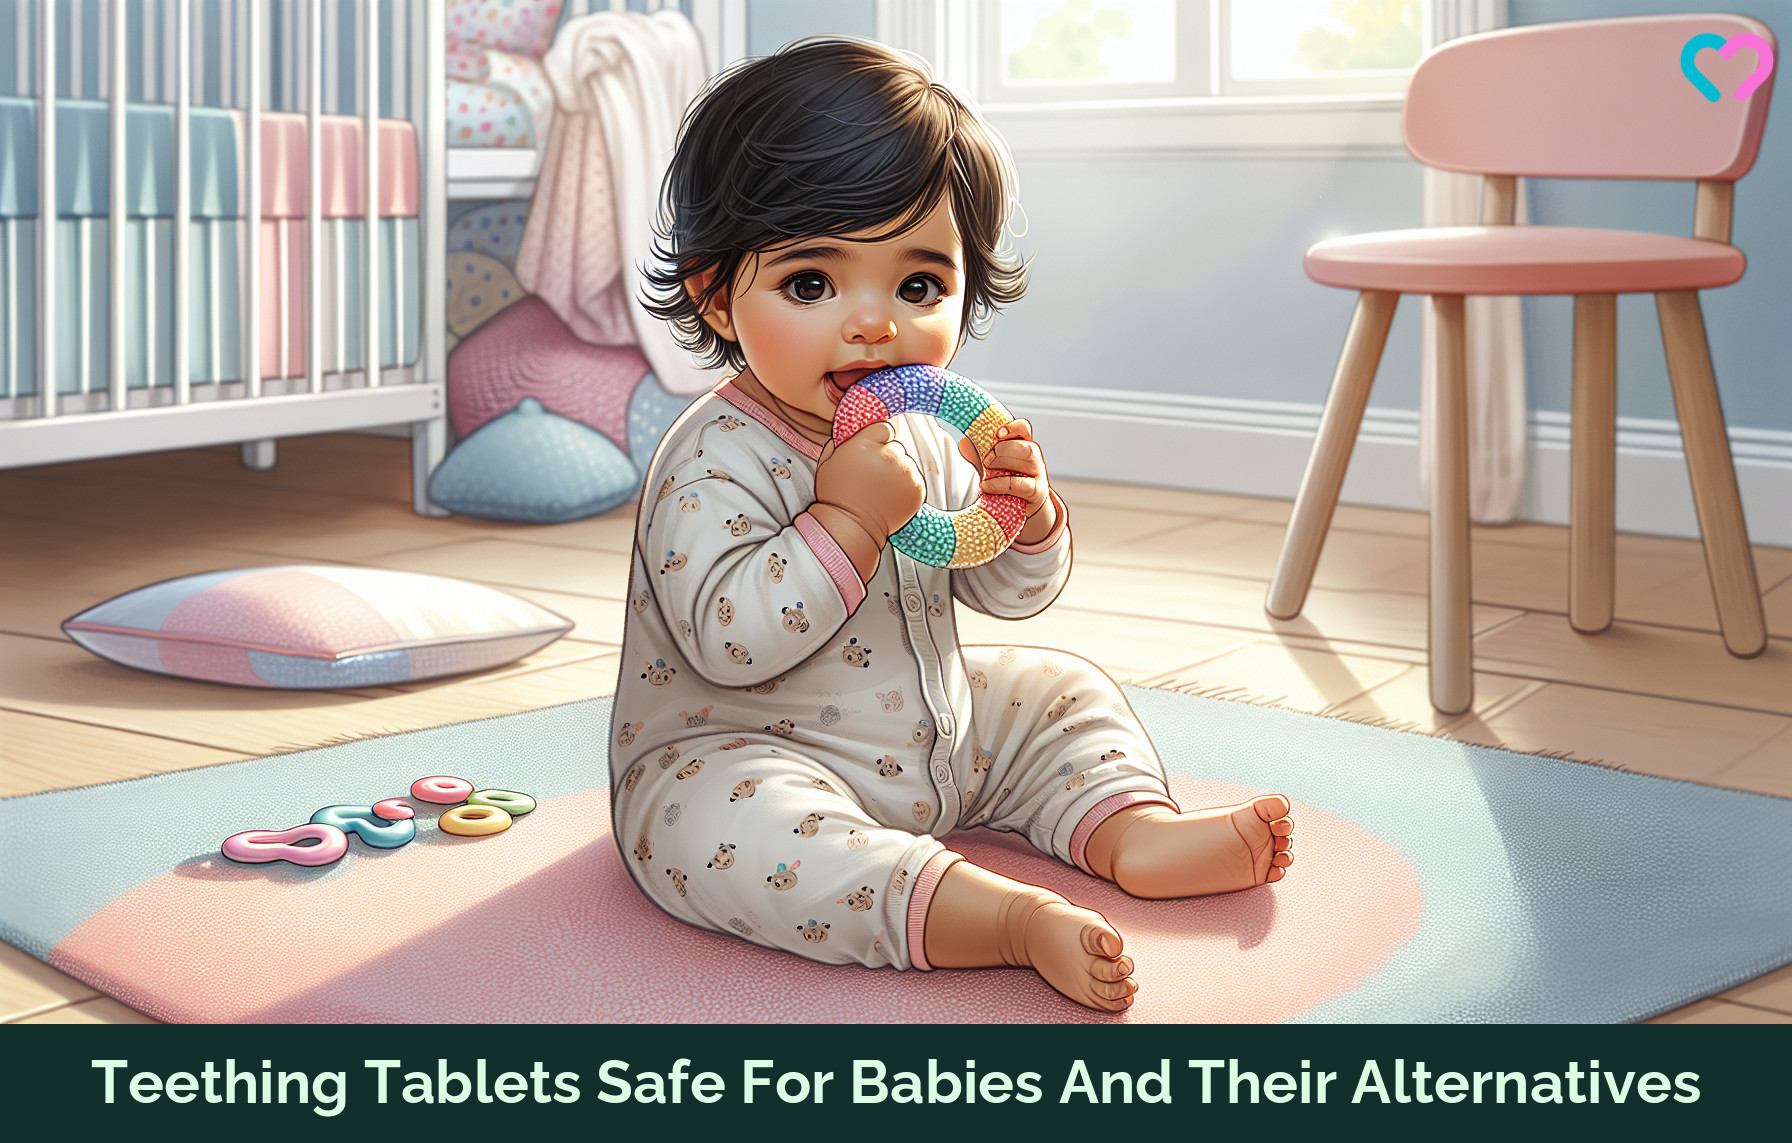 Teething Tablets For Baby_illustration